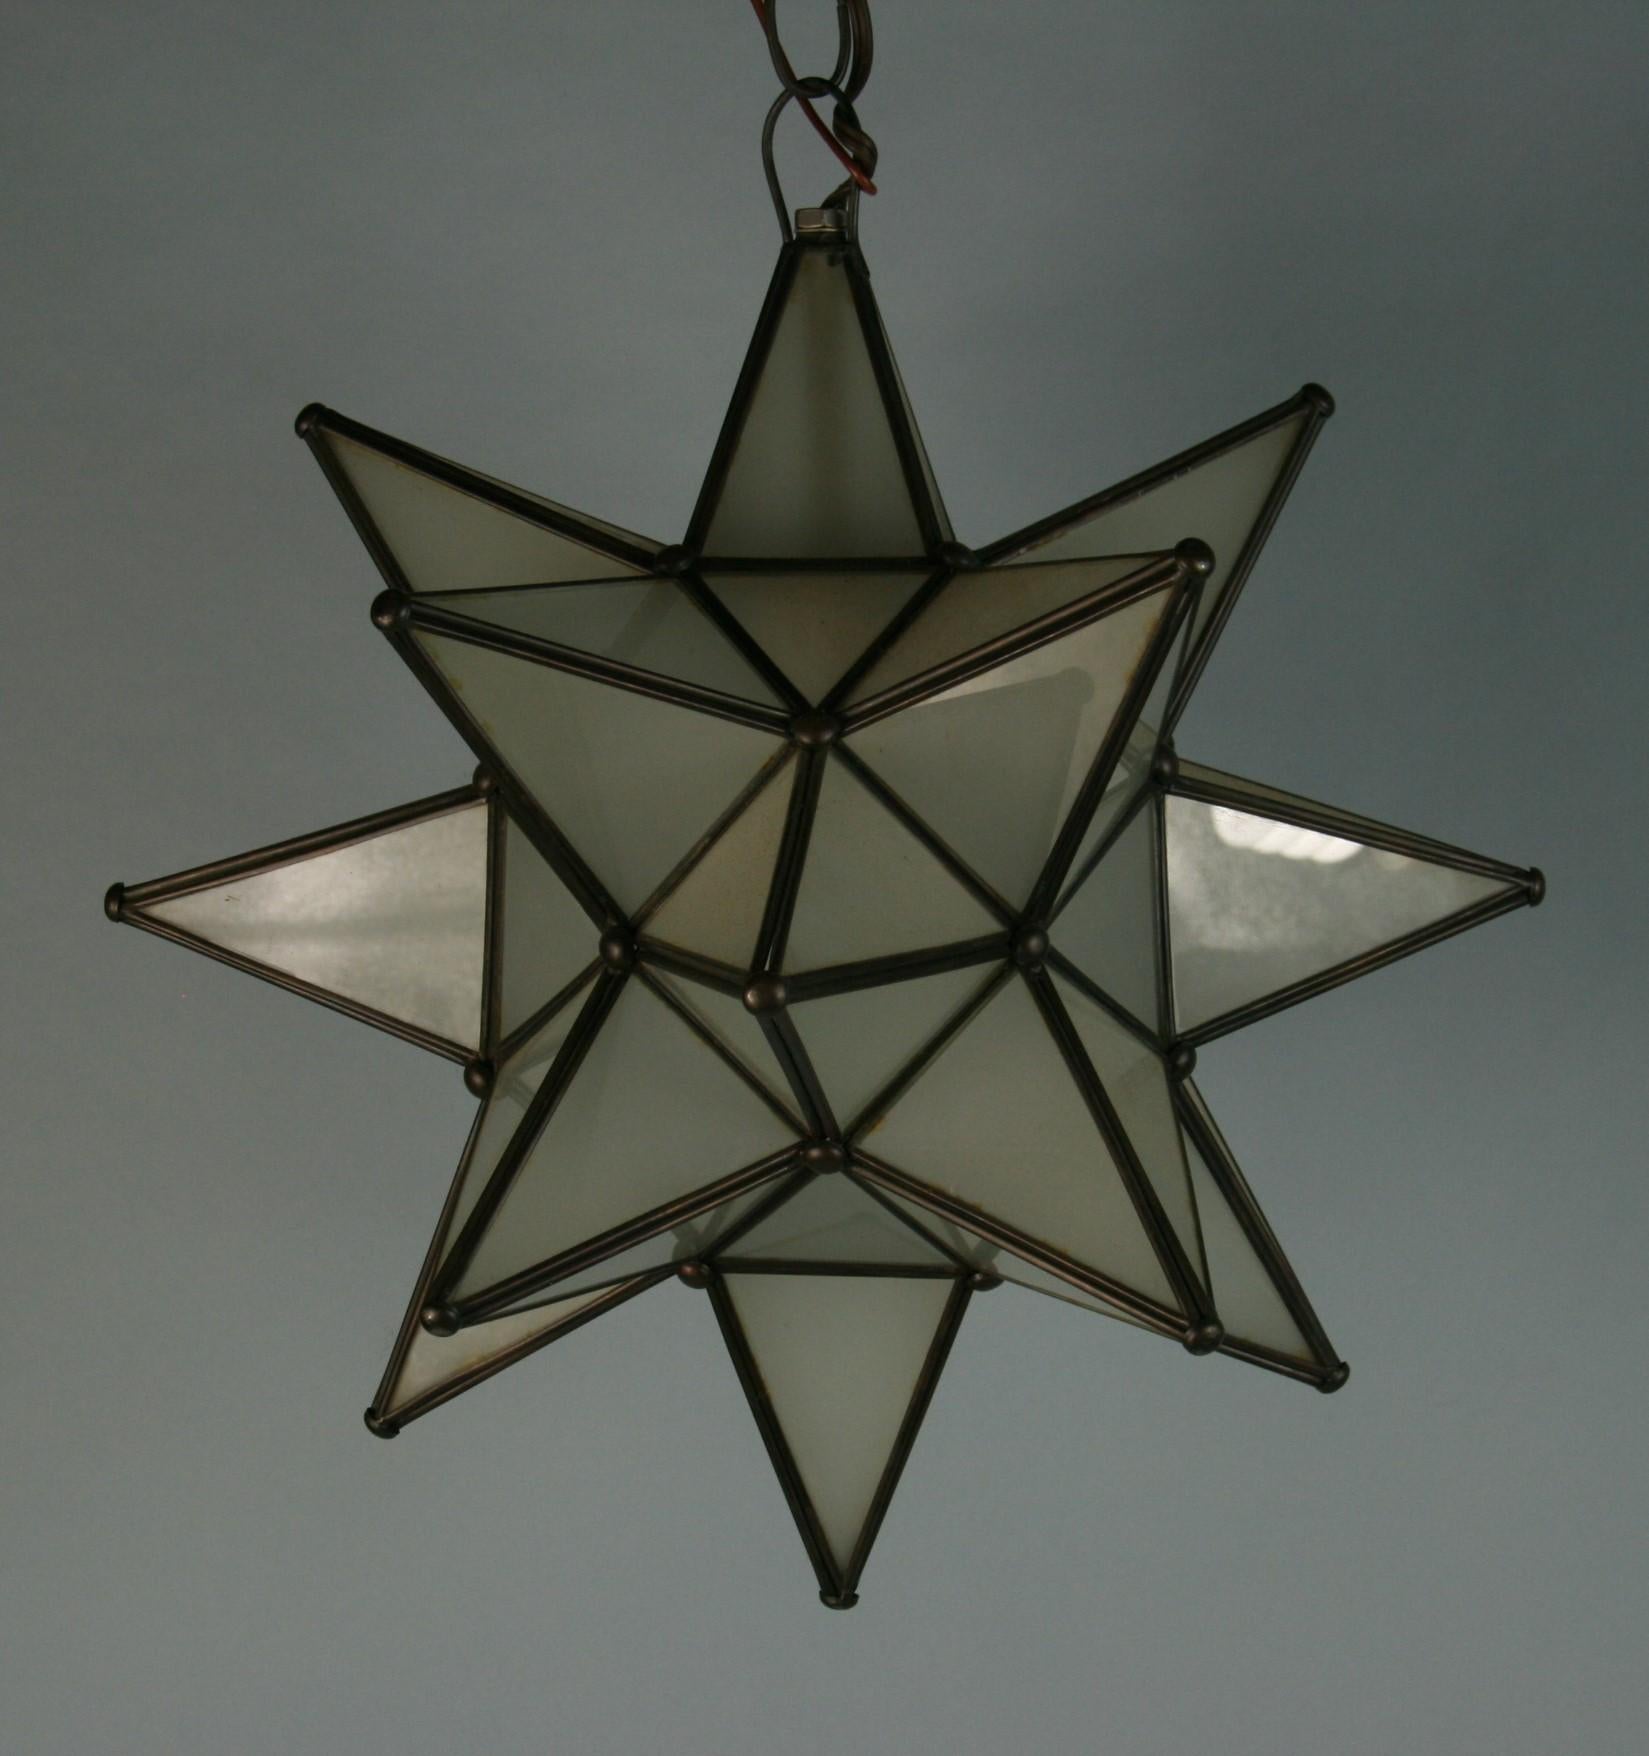 3-809ab Moravian star pendant
Takes one Edison based bulb 60 Watt
2 available
one has stabilized crack in tip of glass see last photo.